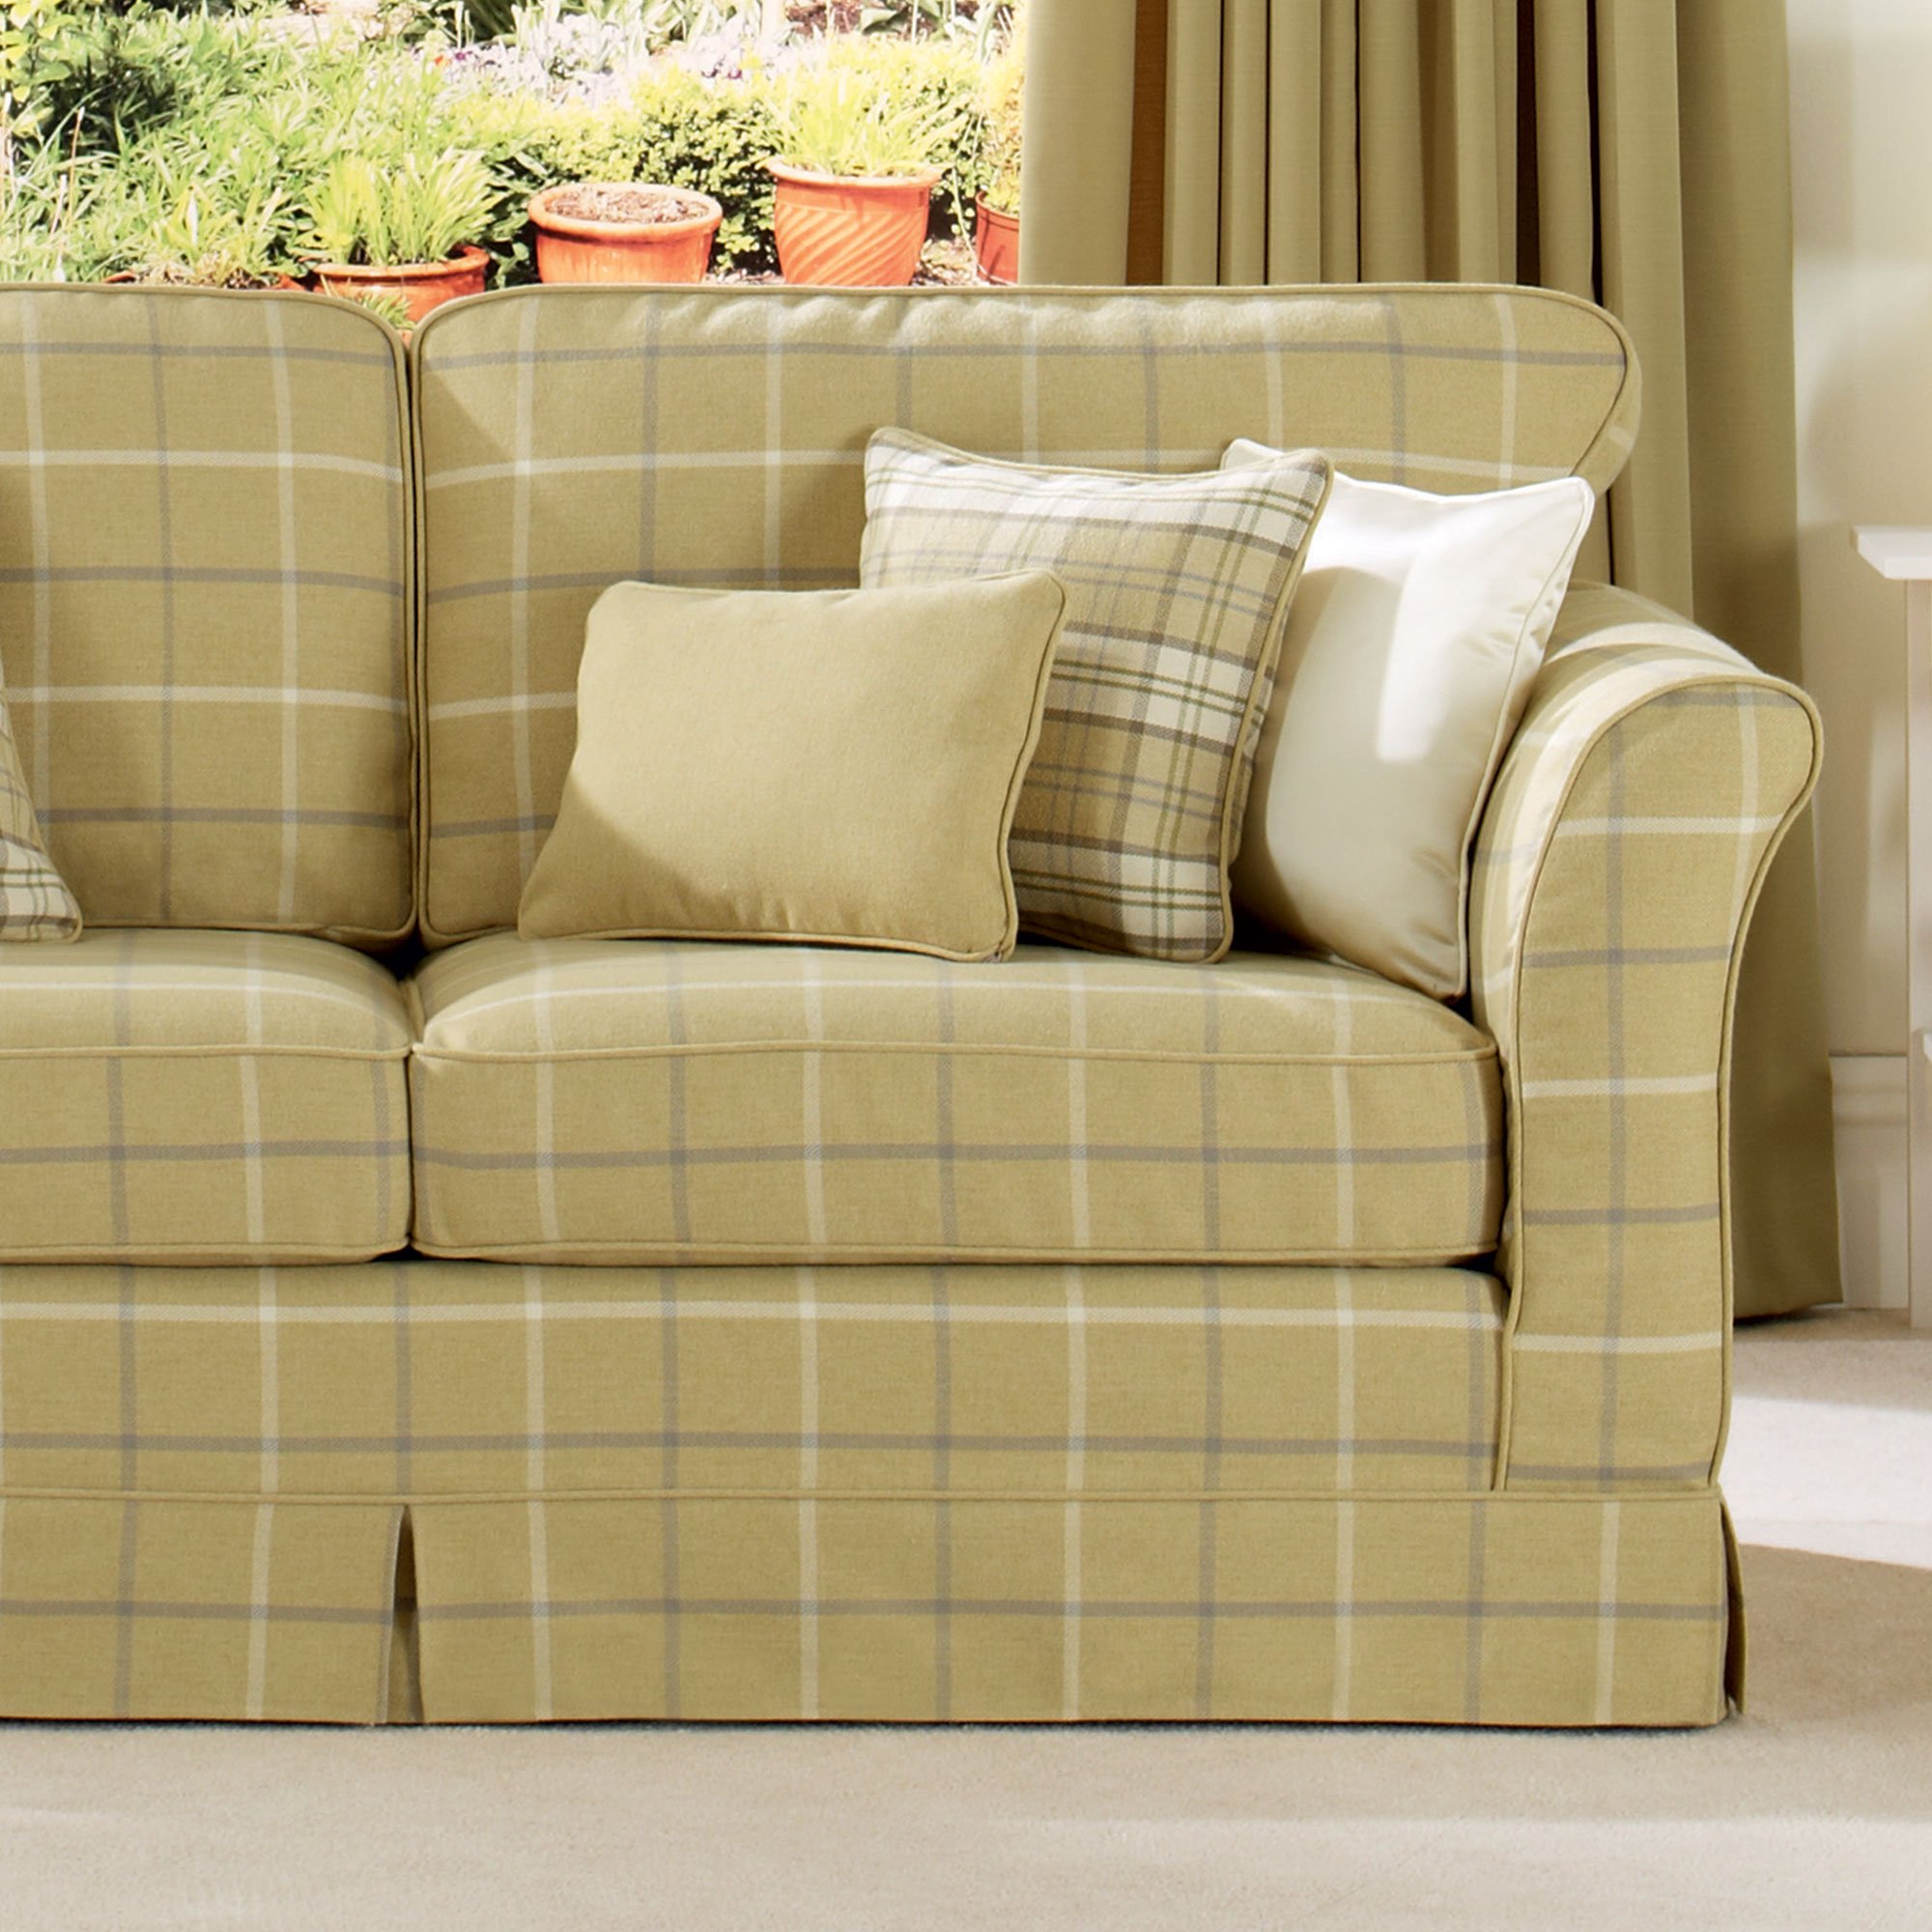 Washable sofa covers in a huge range of fabrics and textures